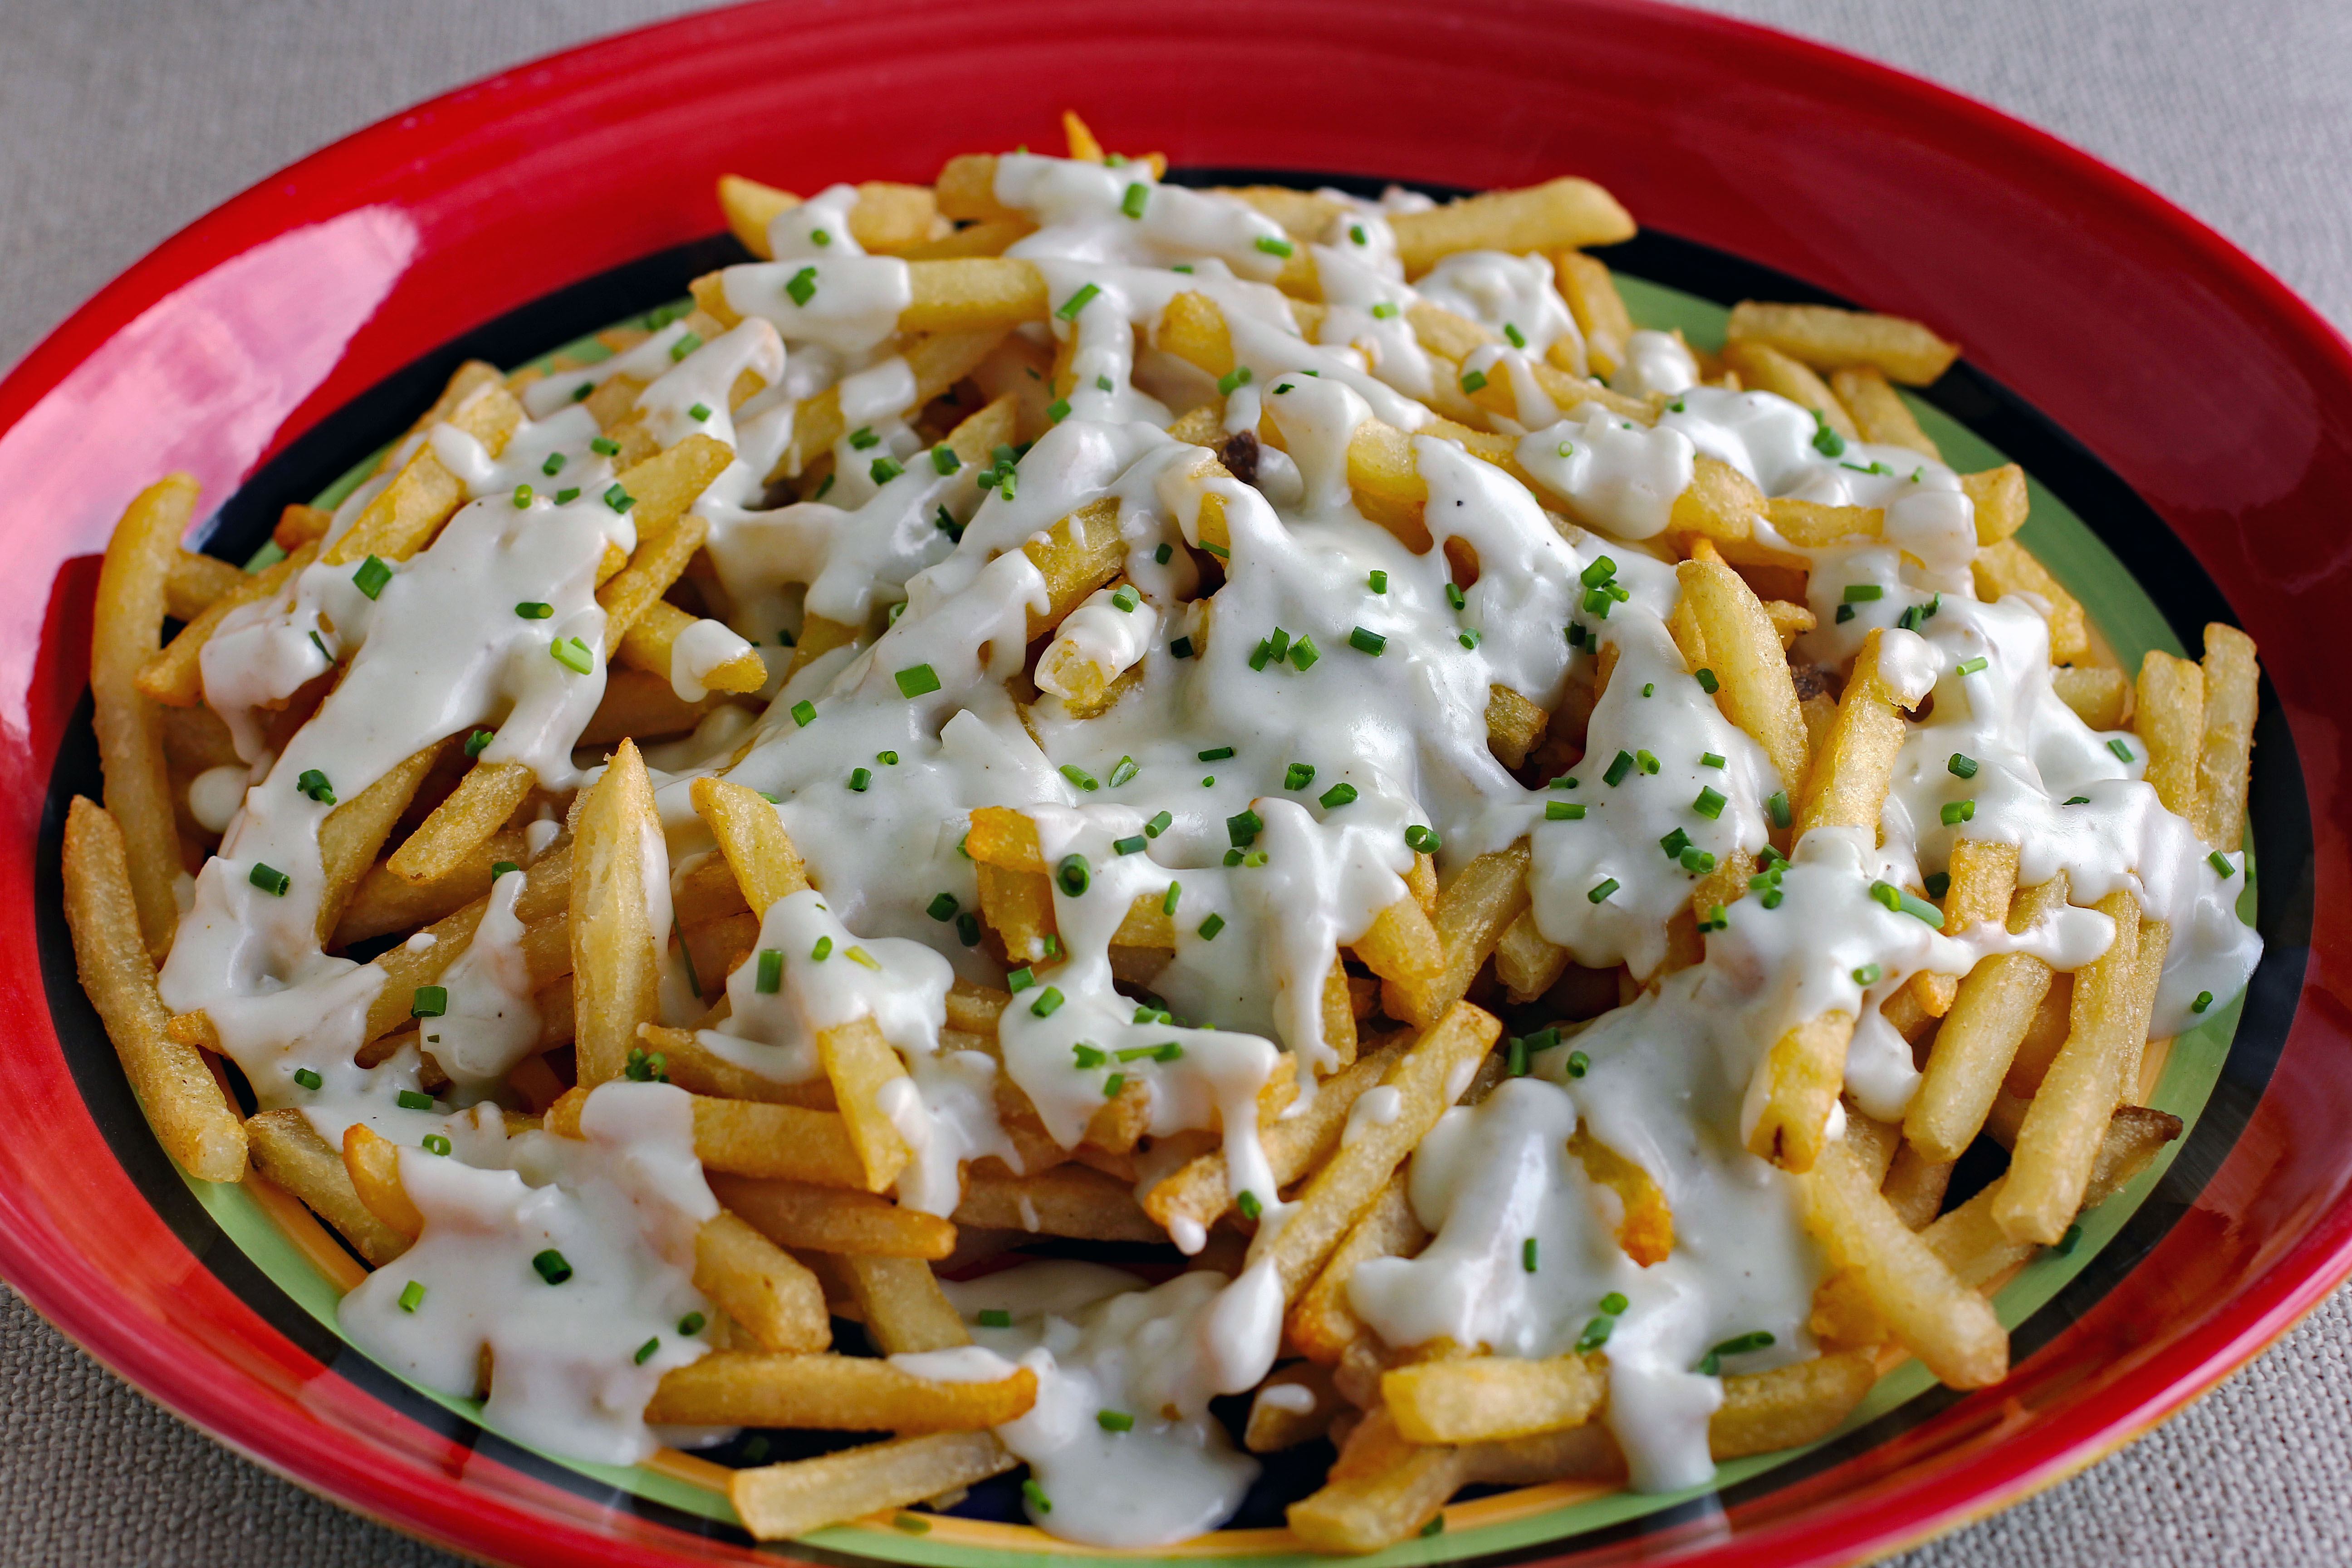 Sawtooth Grill Blue Cheese Fries